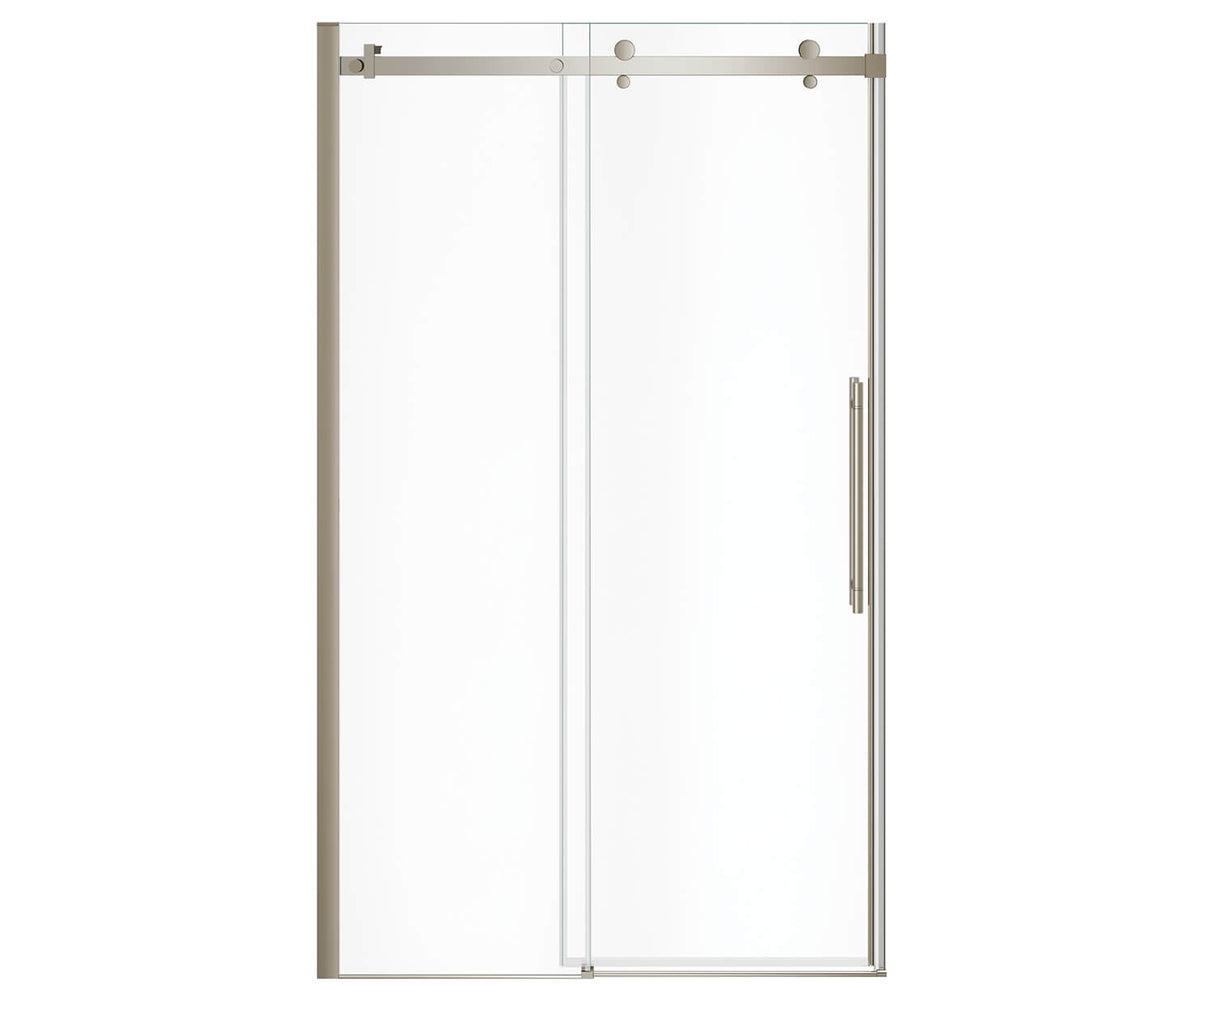 MAAX 138460-900-305-000 Vela 44 ½-47 x 78 ¾ in. 8mm Sliding Shower Door for Alcove Installation with Clear glass in Brushed Nickel